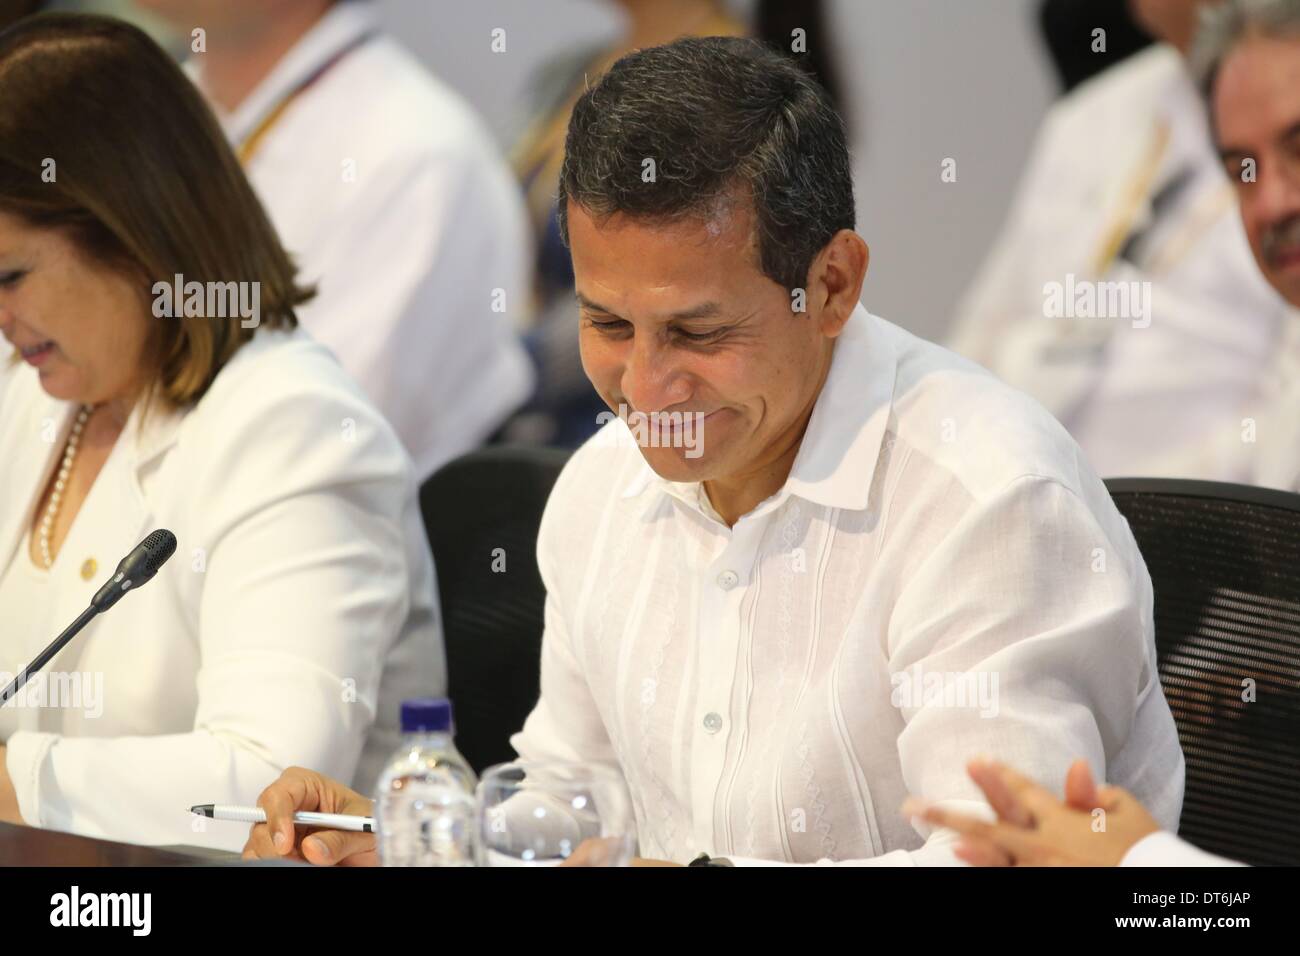 Cartagena. 10th Feb, 2014. Peru's President Ollanta Humala attends the 8th Summit of the Pacific Alliance in the northern Colombian city of Cartagena, Feb. 10, 2014. © Hou Xiwen/Xinhua/Alamy Live News Stock Photo